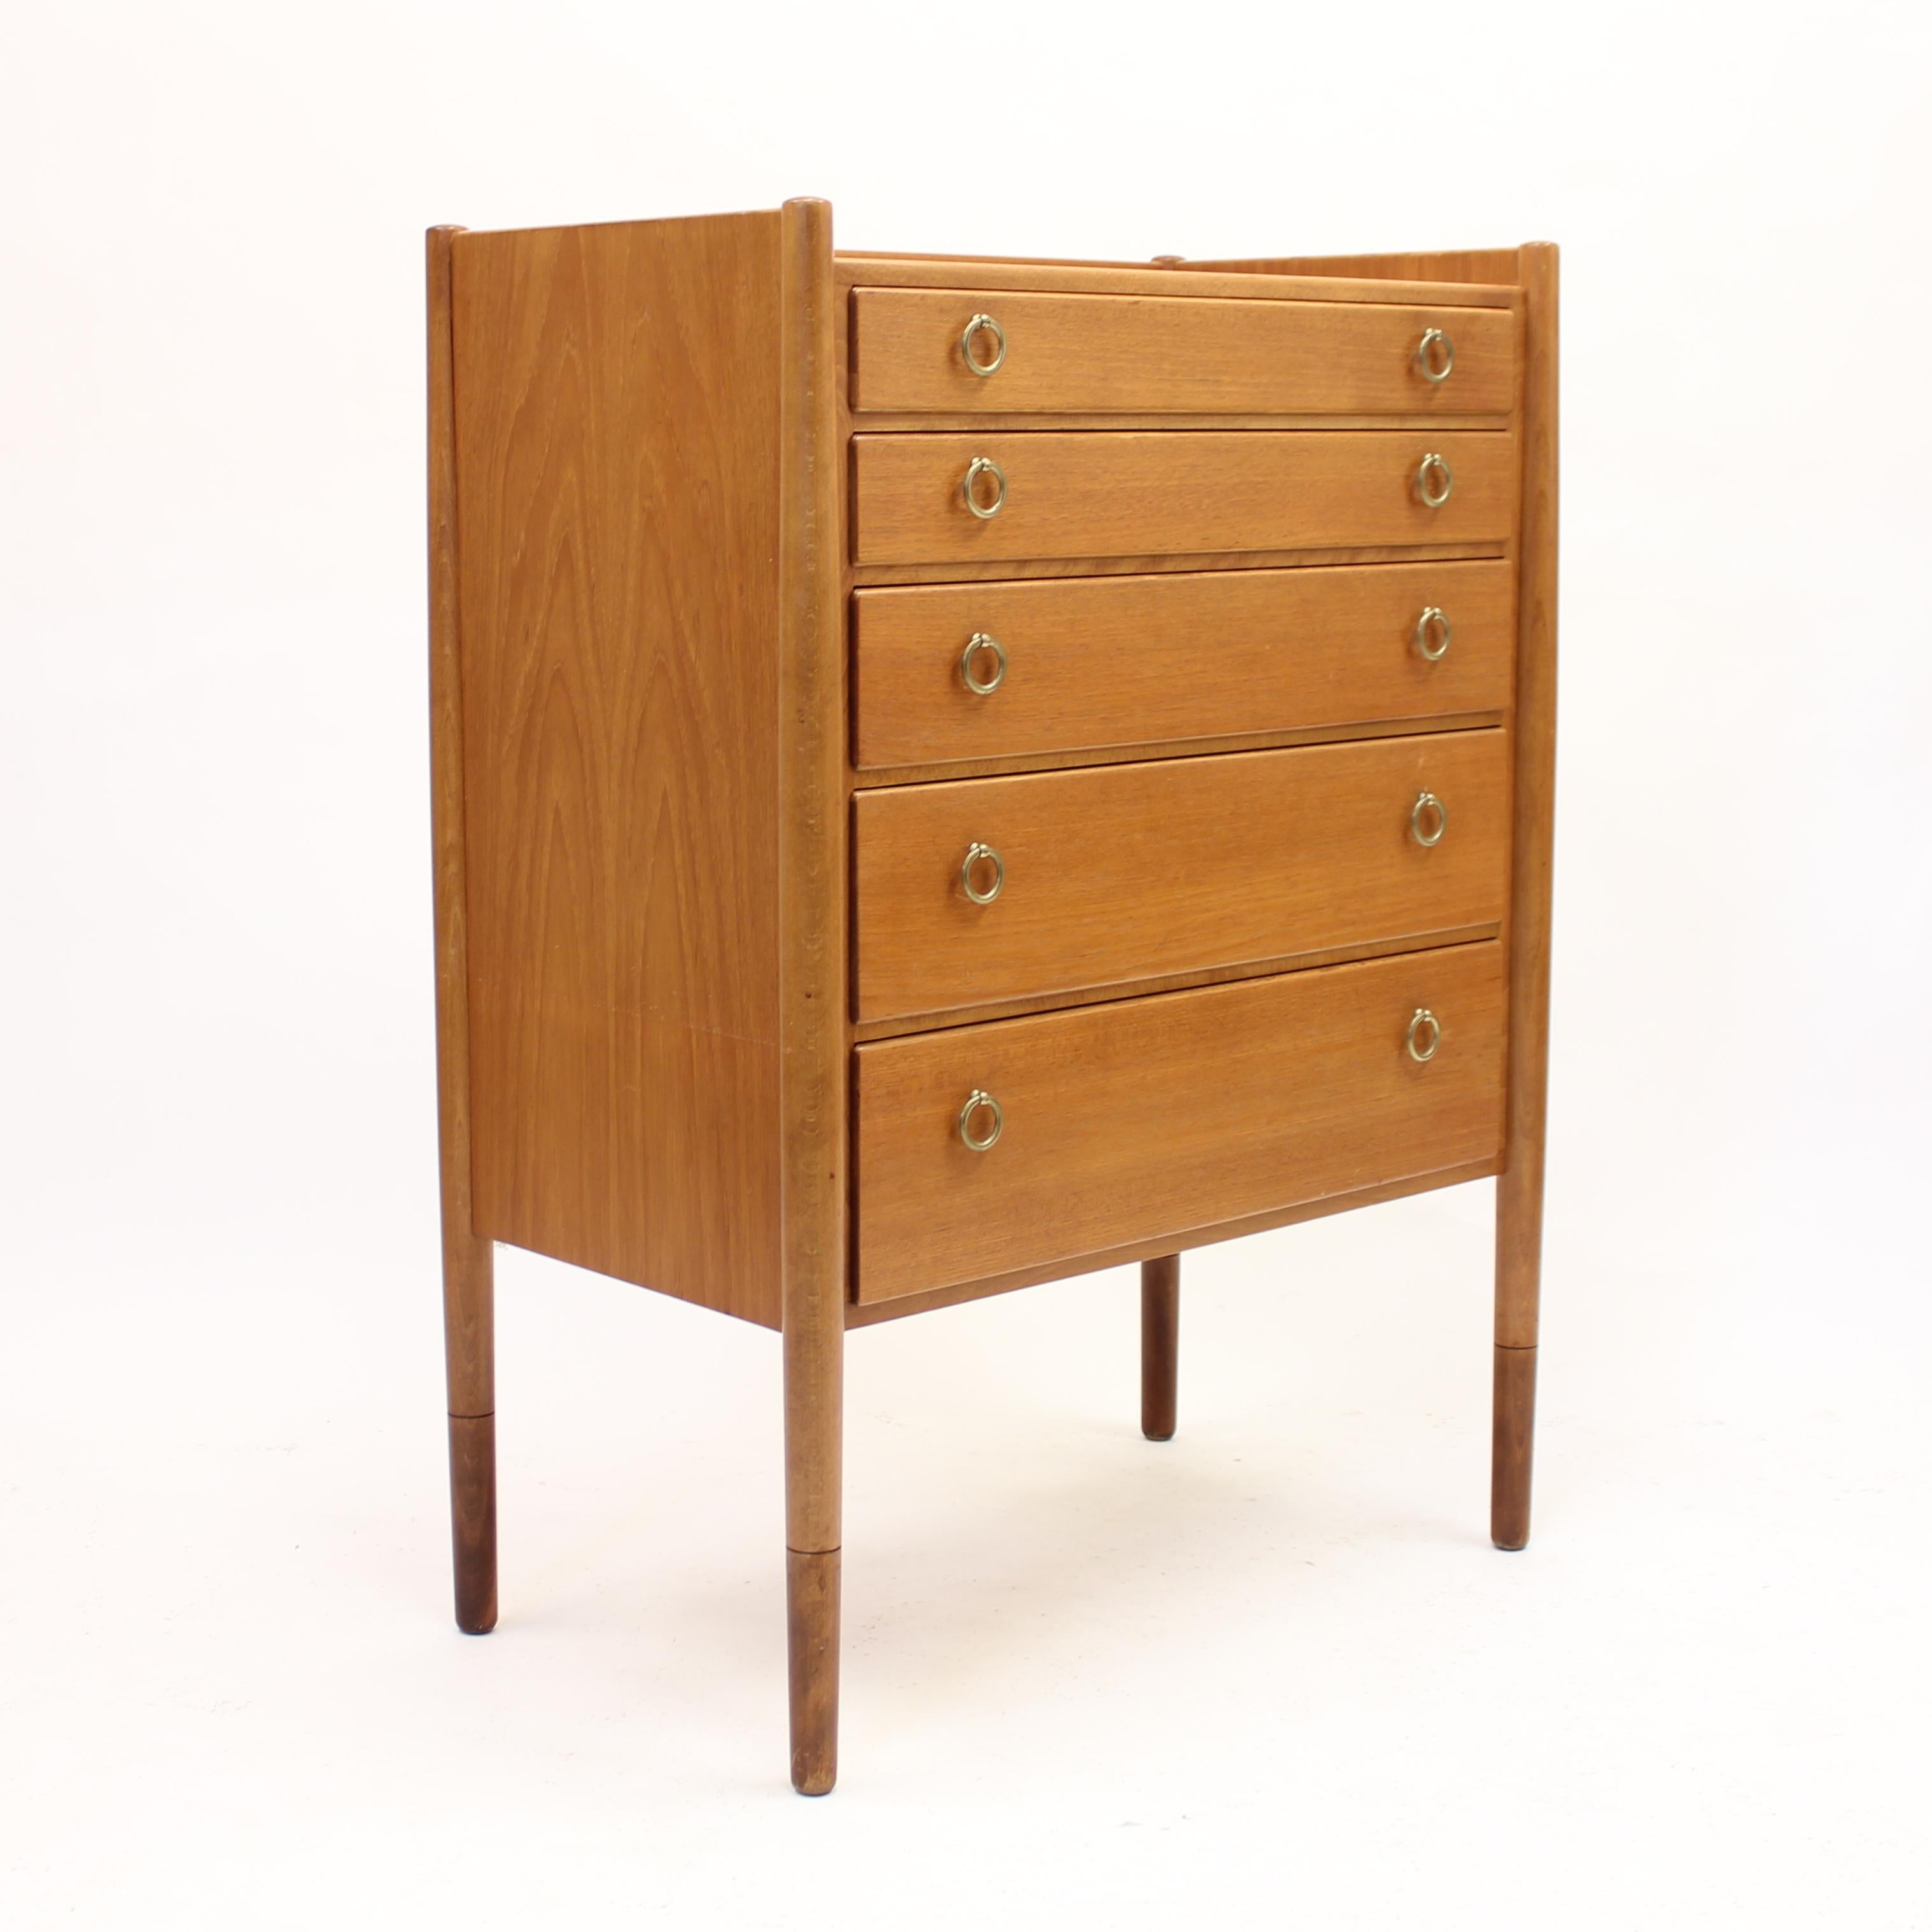 Mid-century teak chest of drawers with 5 drawers and round brass handles made by Swedish company Treman in the 1960s. The lower part of the lags has a darker staining which makes a nice contrast between that and the rest of the chest. It's a bit